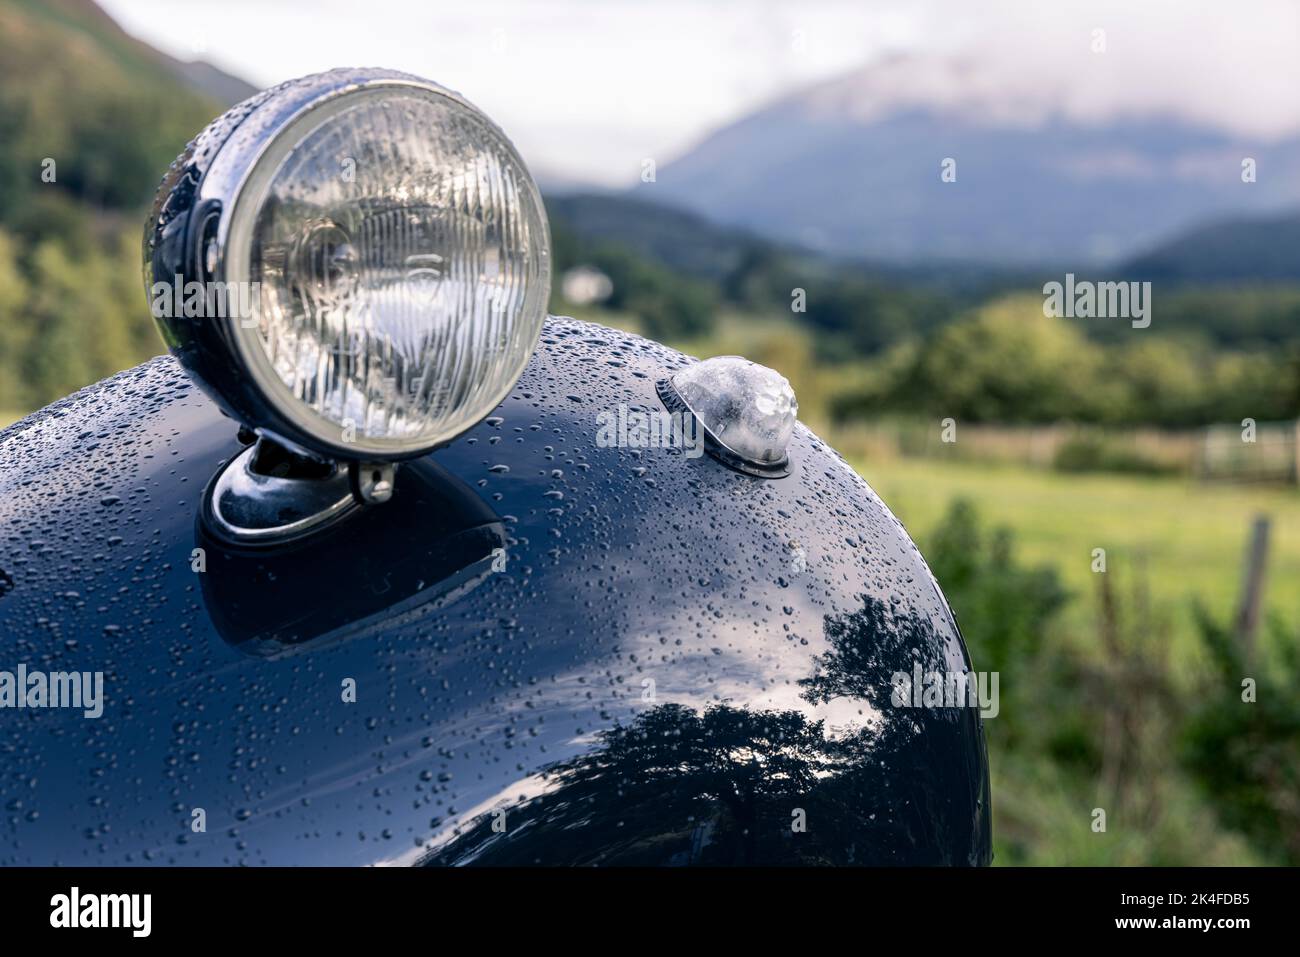 Reflections and raindrops on the paintwork of the mudguard, bodywork and headlamp of a Citroen Light 15 vintage car in the Lake District, Cumbria, Eng Stock Photo